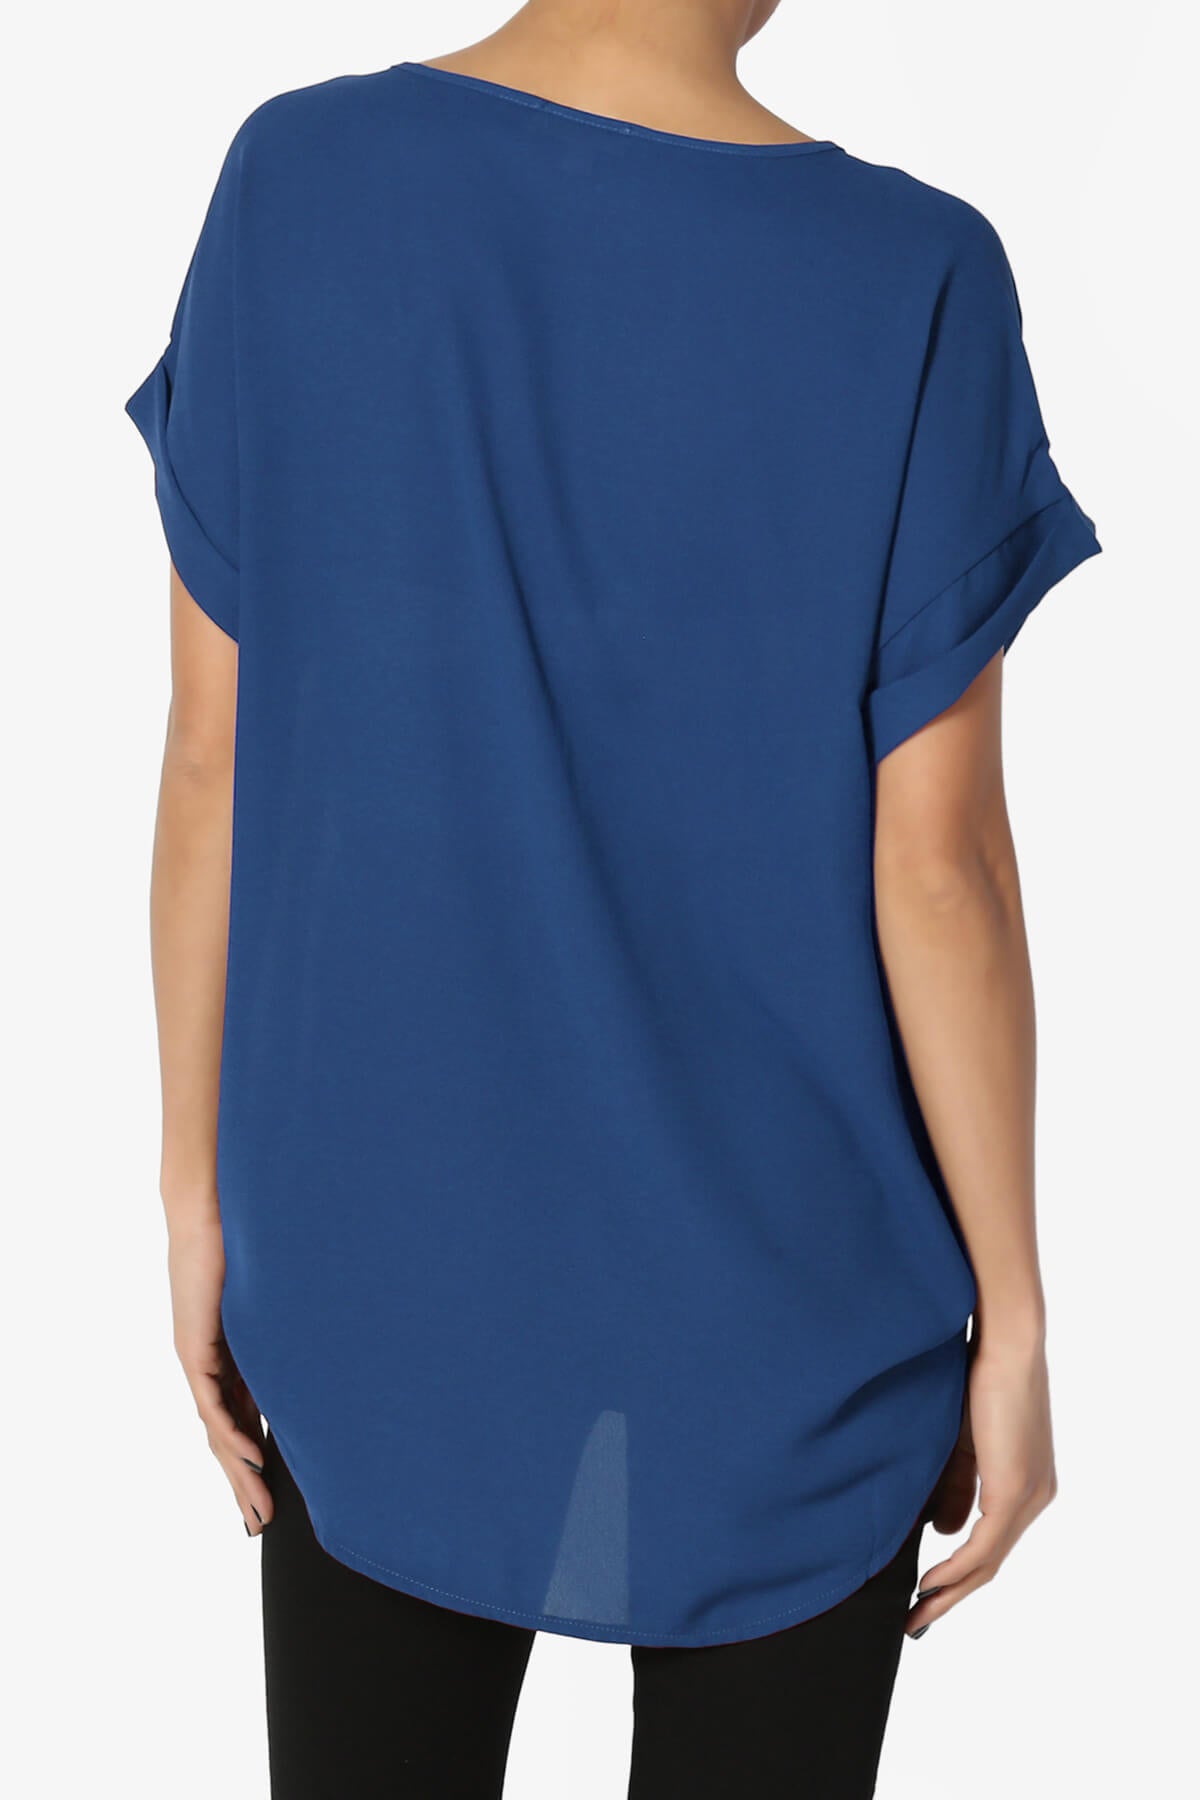 Load image into Gallery viewer, Juliette Boat Neck Chiffon Top MID NAVY_2
